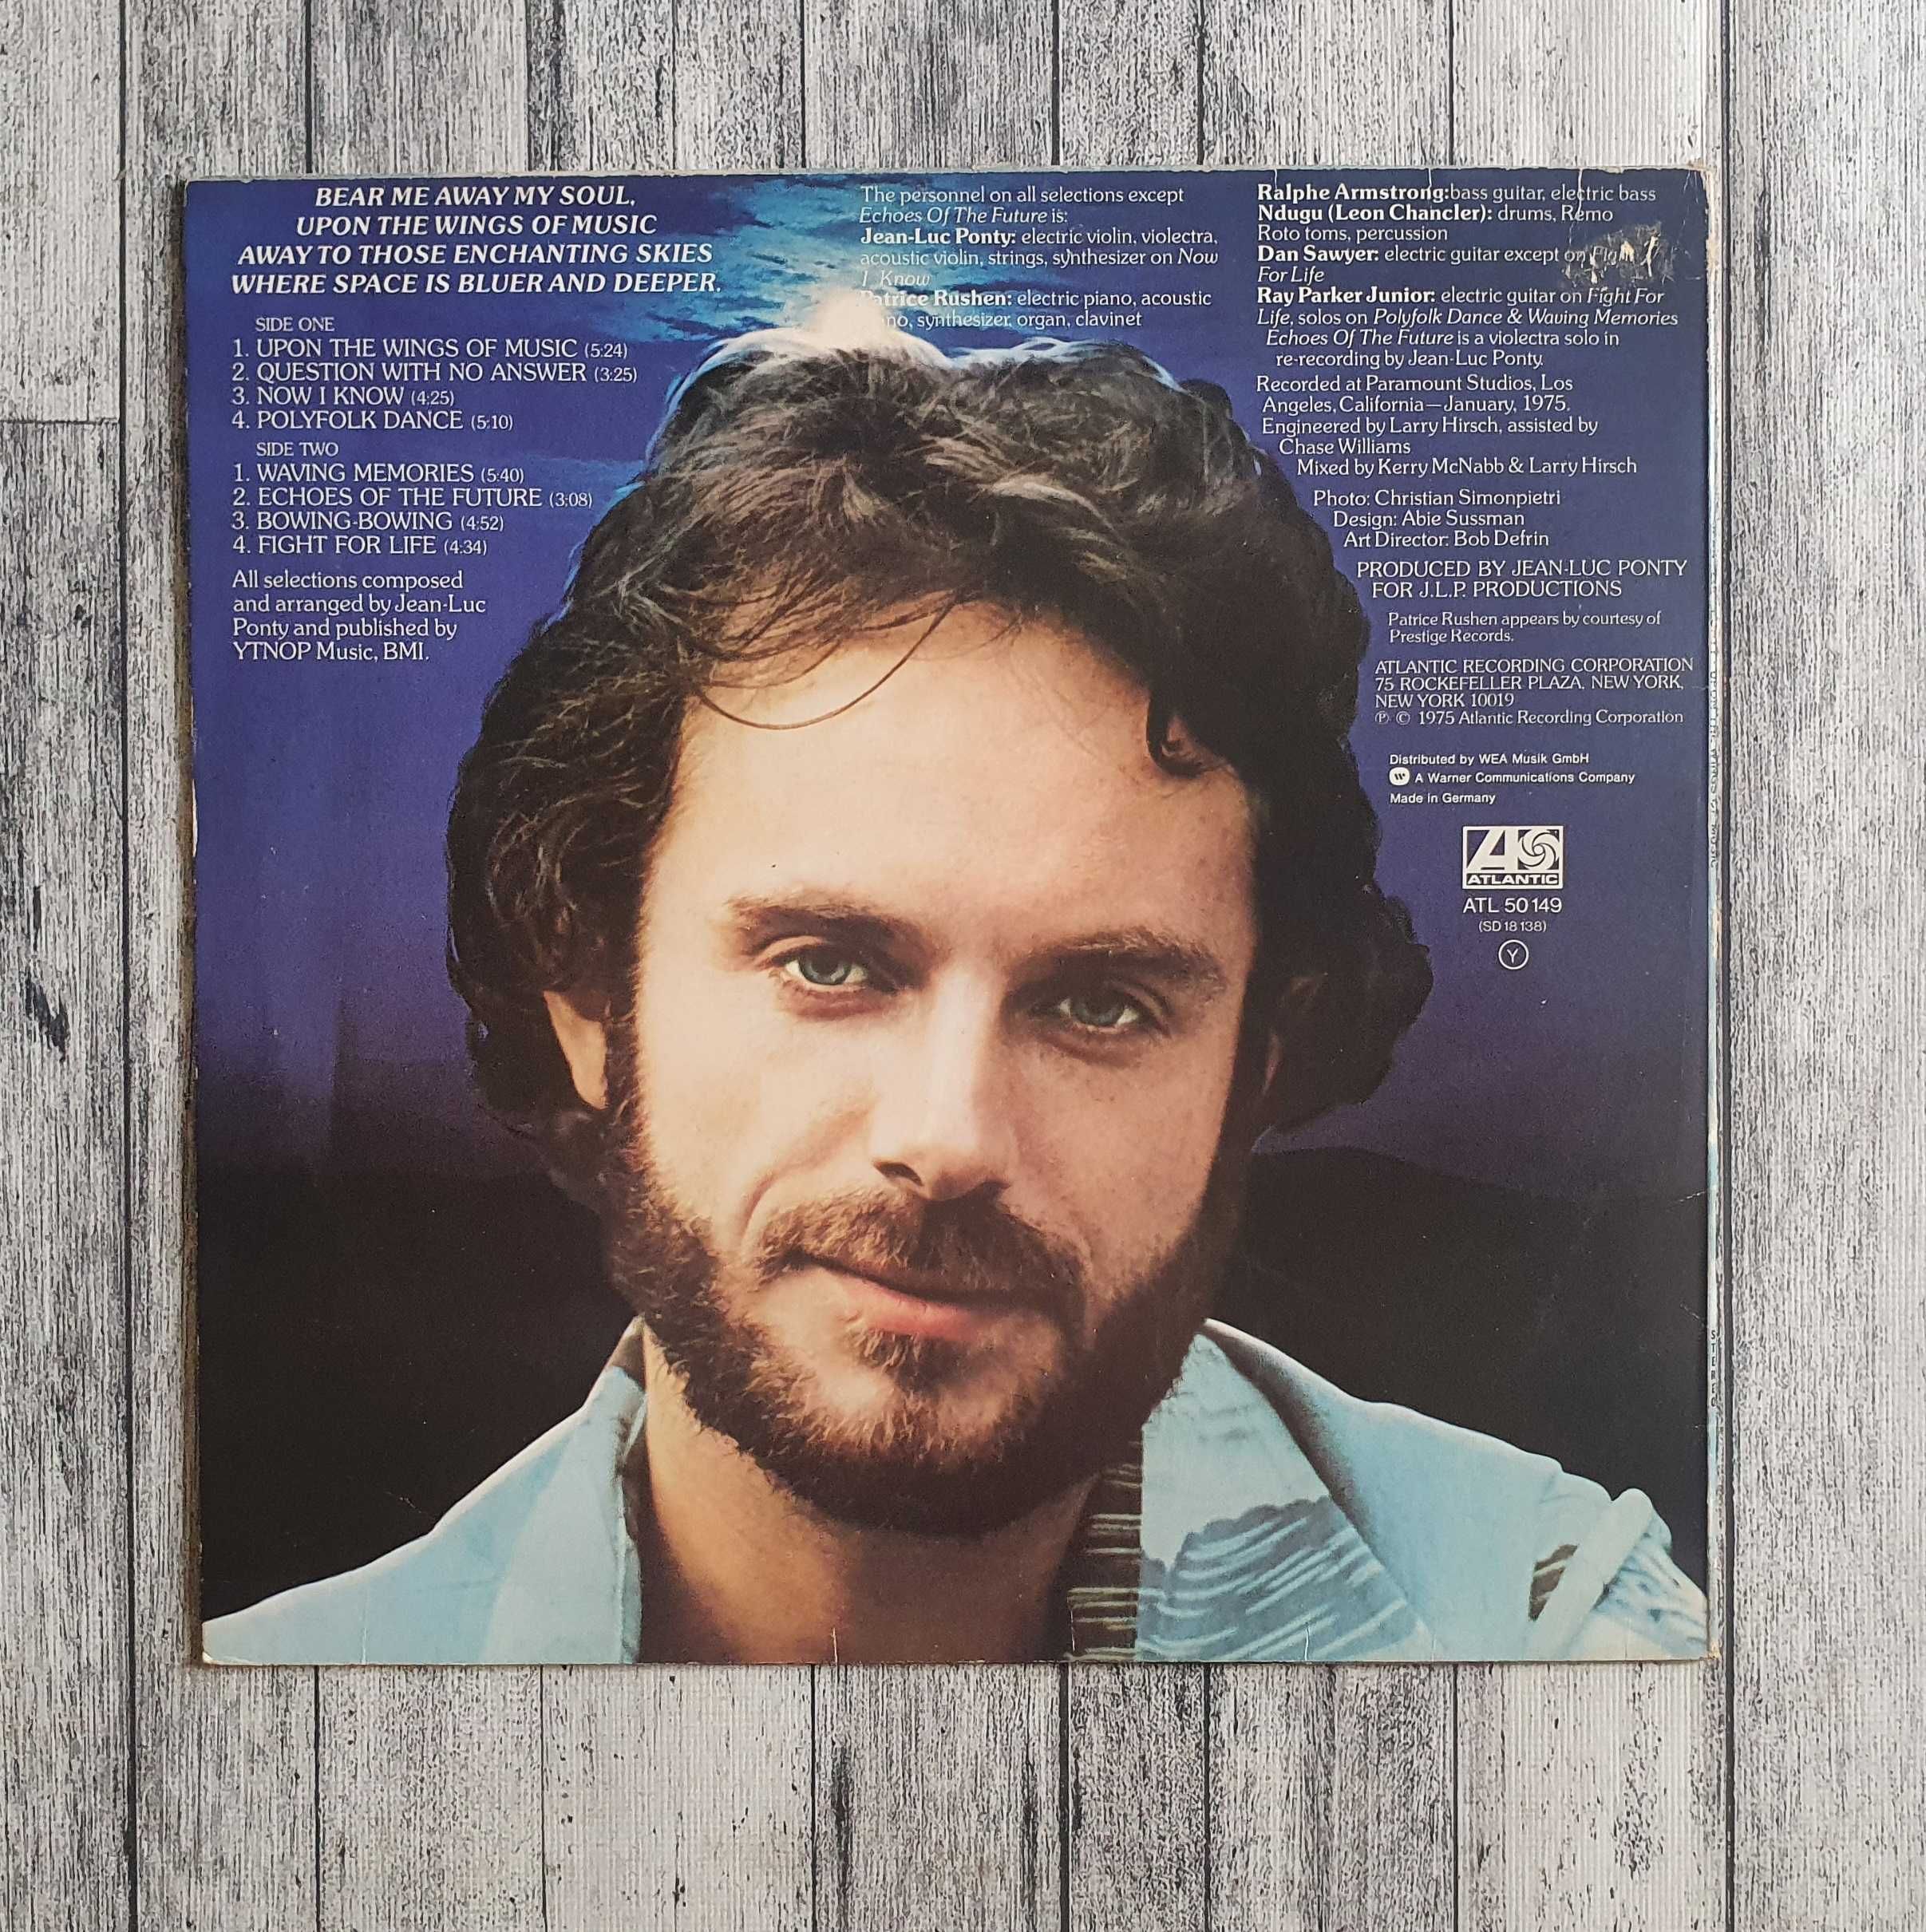 Jean Luc Ponty Upon The Wings of Music LP 12